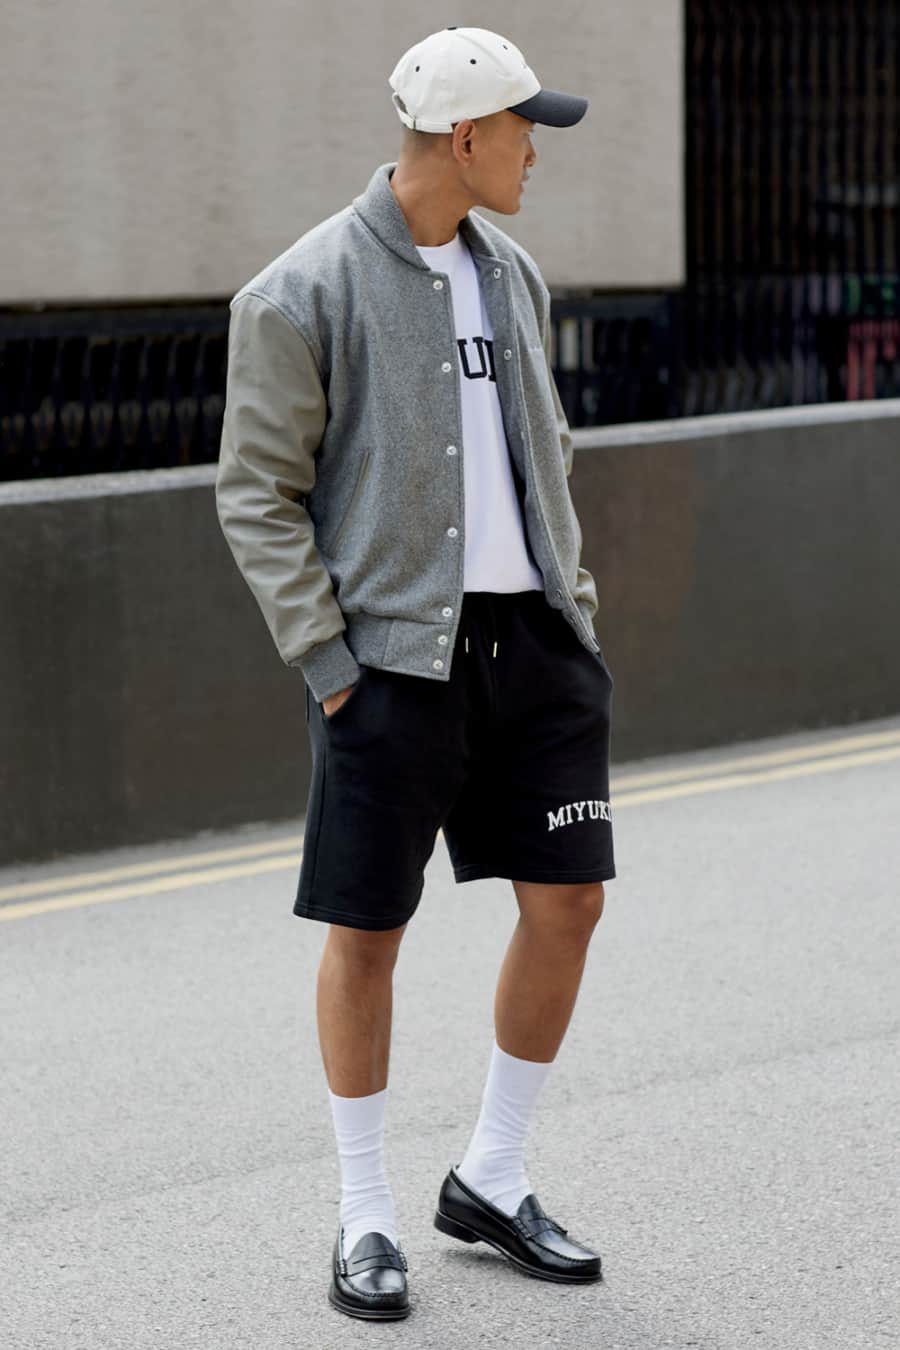 Men's black shorts, white T-shirt, grey varsity jacket, white socks and black penny loafers outfit